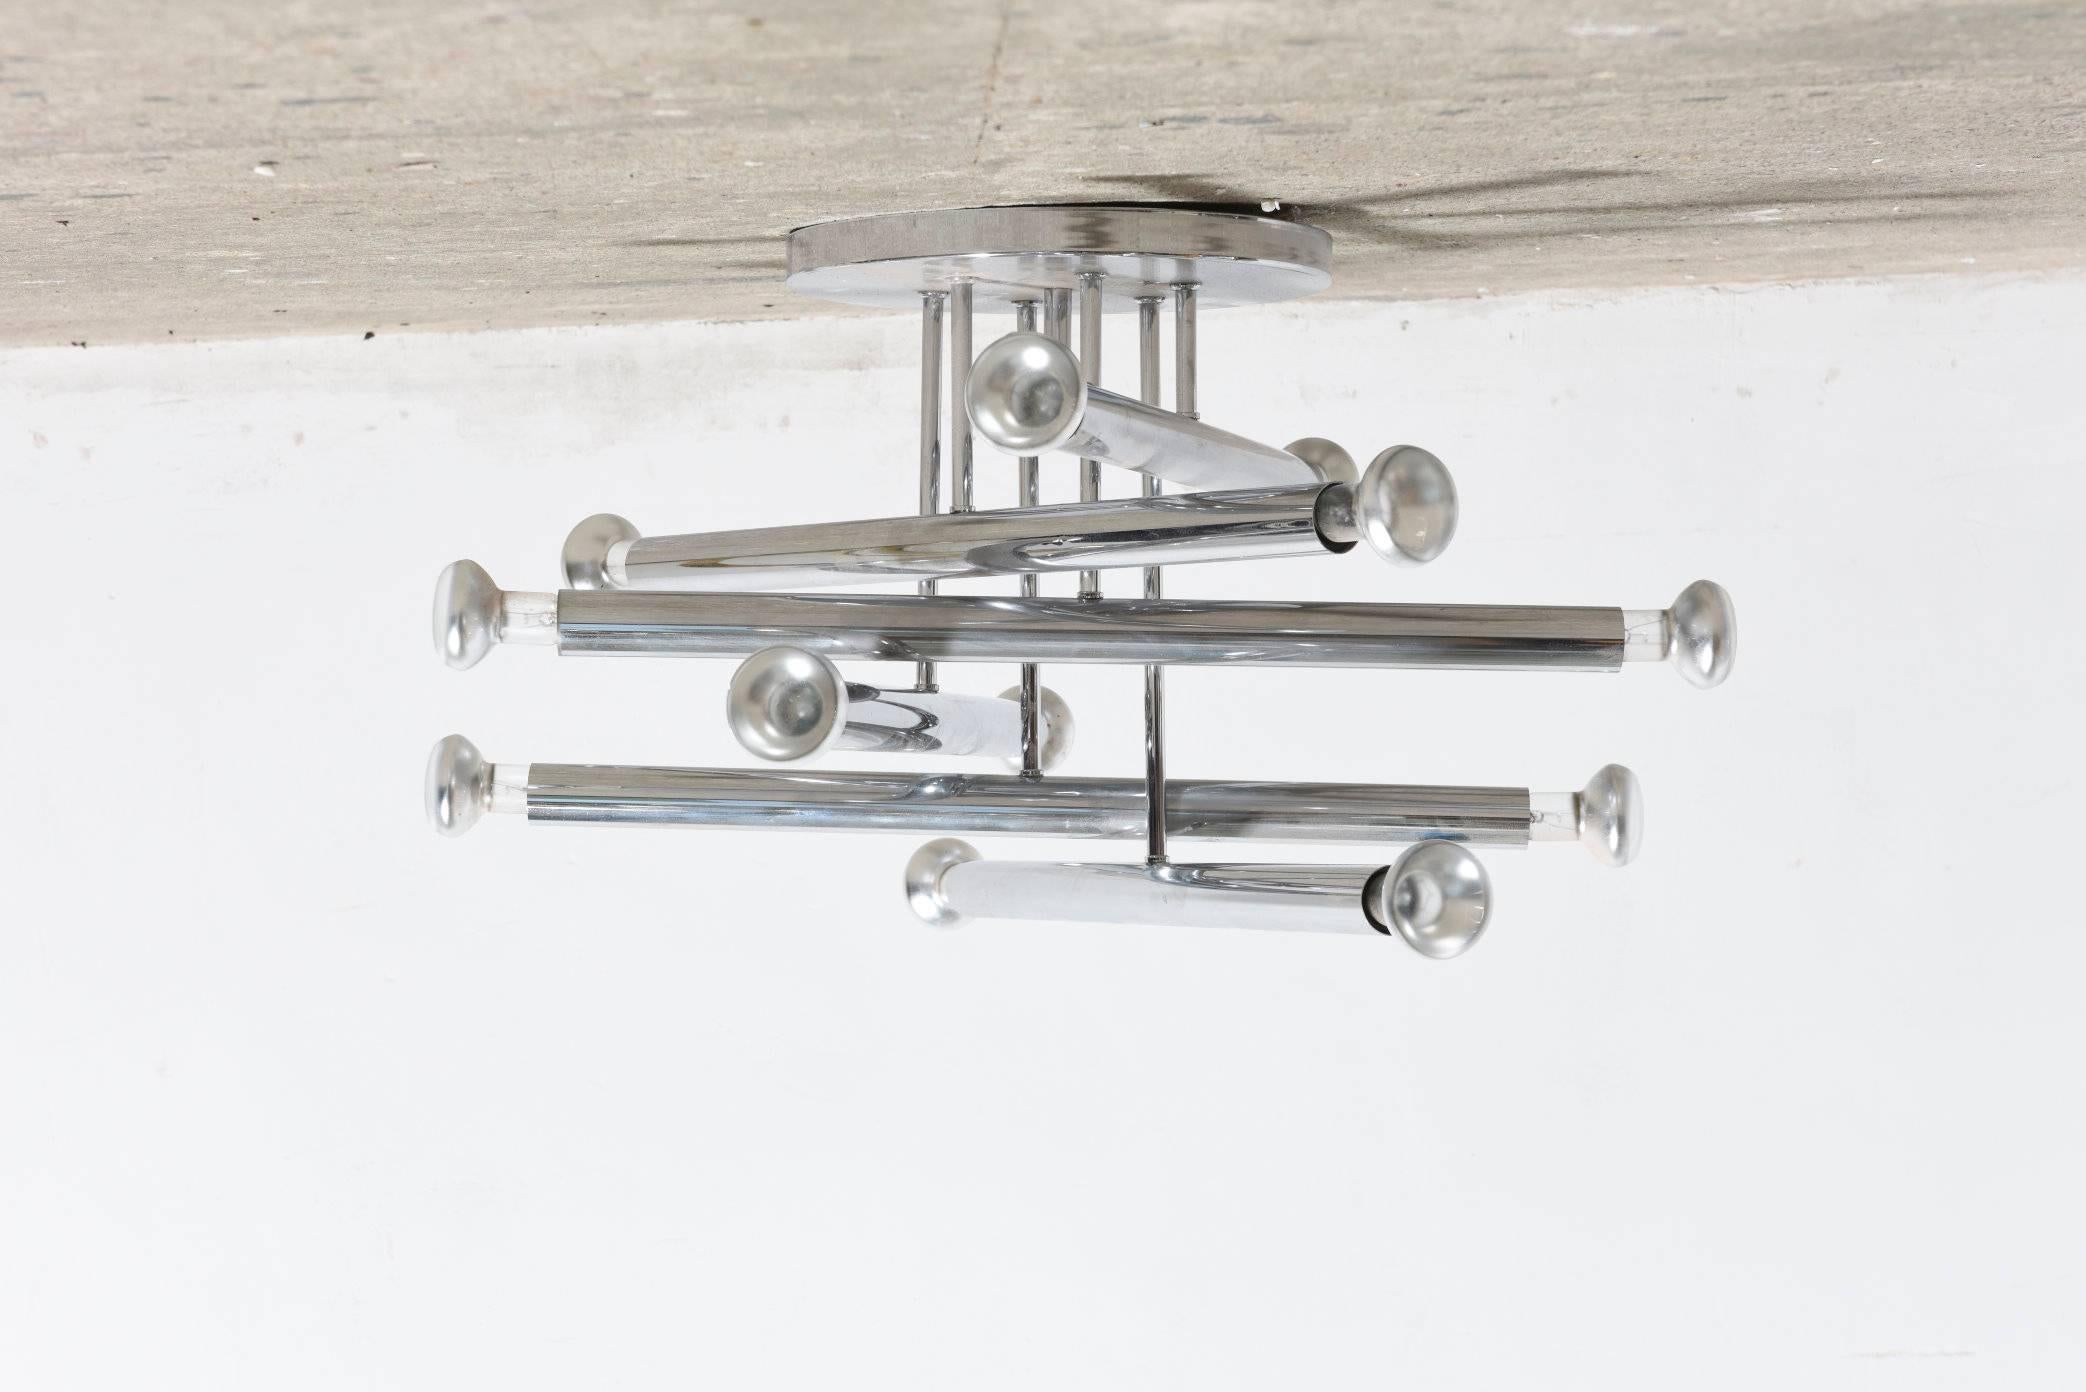 A 12 light flush mount modernist ceiling light in chrome composed of multiple chrome tube by Geatano Sciolari.
 

Designed by Sciolari for Belgian Manufacturers Boulanger

This twelve-light fixture creates a powerful statement casting diffused